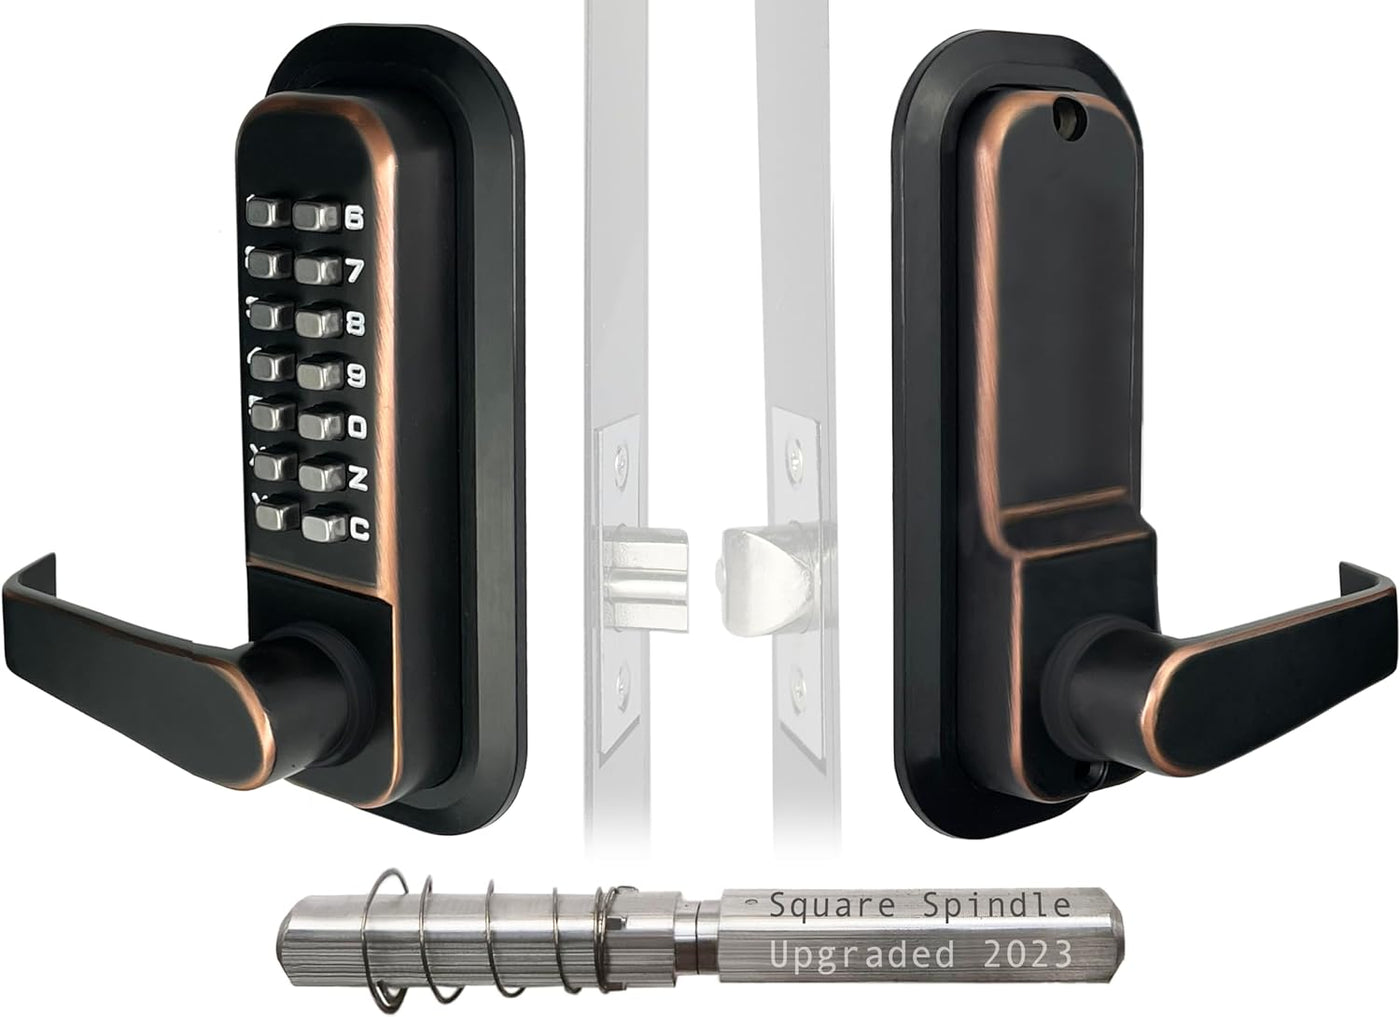 JOUNJIP Single Sided Keyless Entry Door Lock - 100% Mechanical Combination Lever Handle Door Lock - Easy Install - [Square Spindle] - Oil Rubbed Bronze